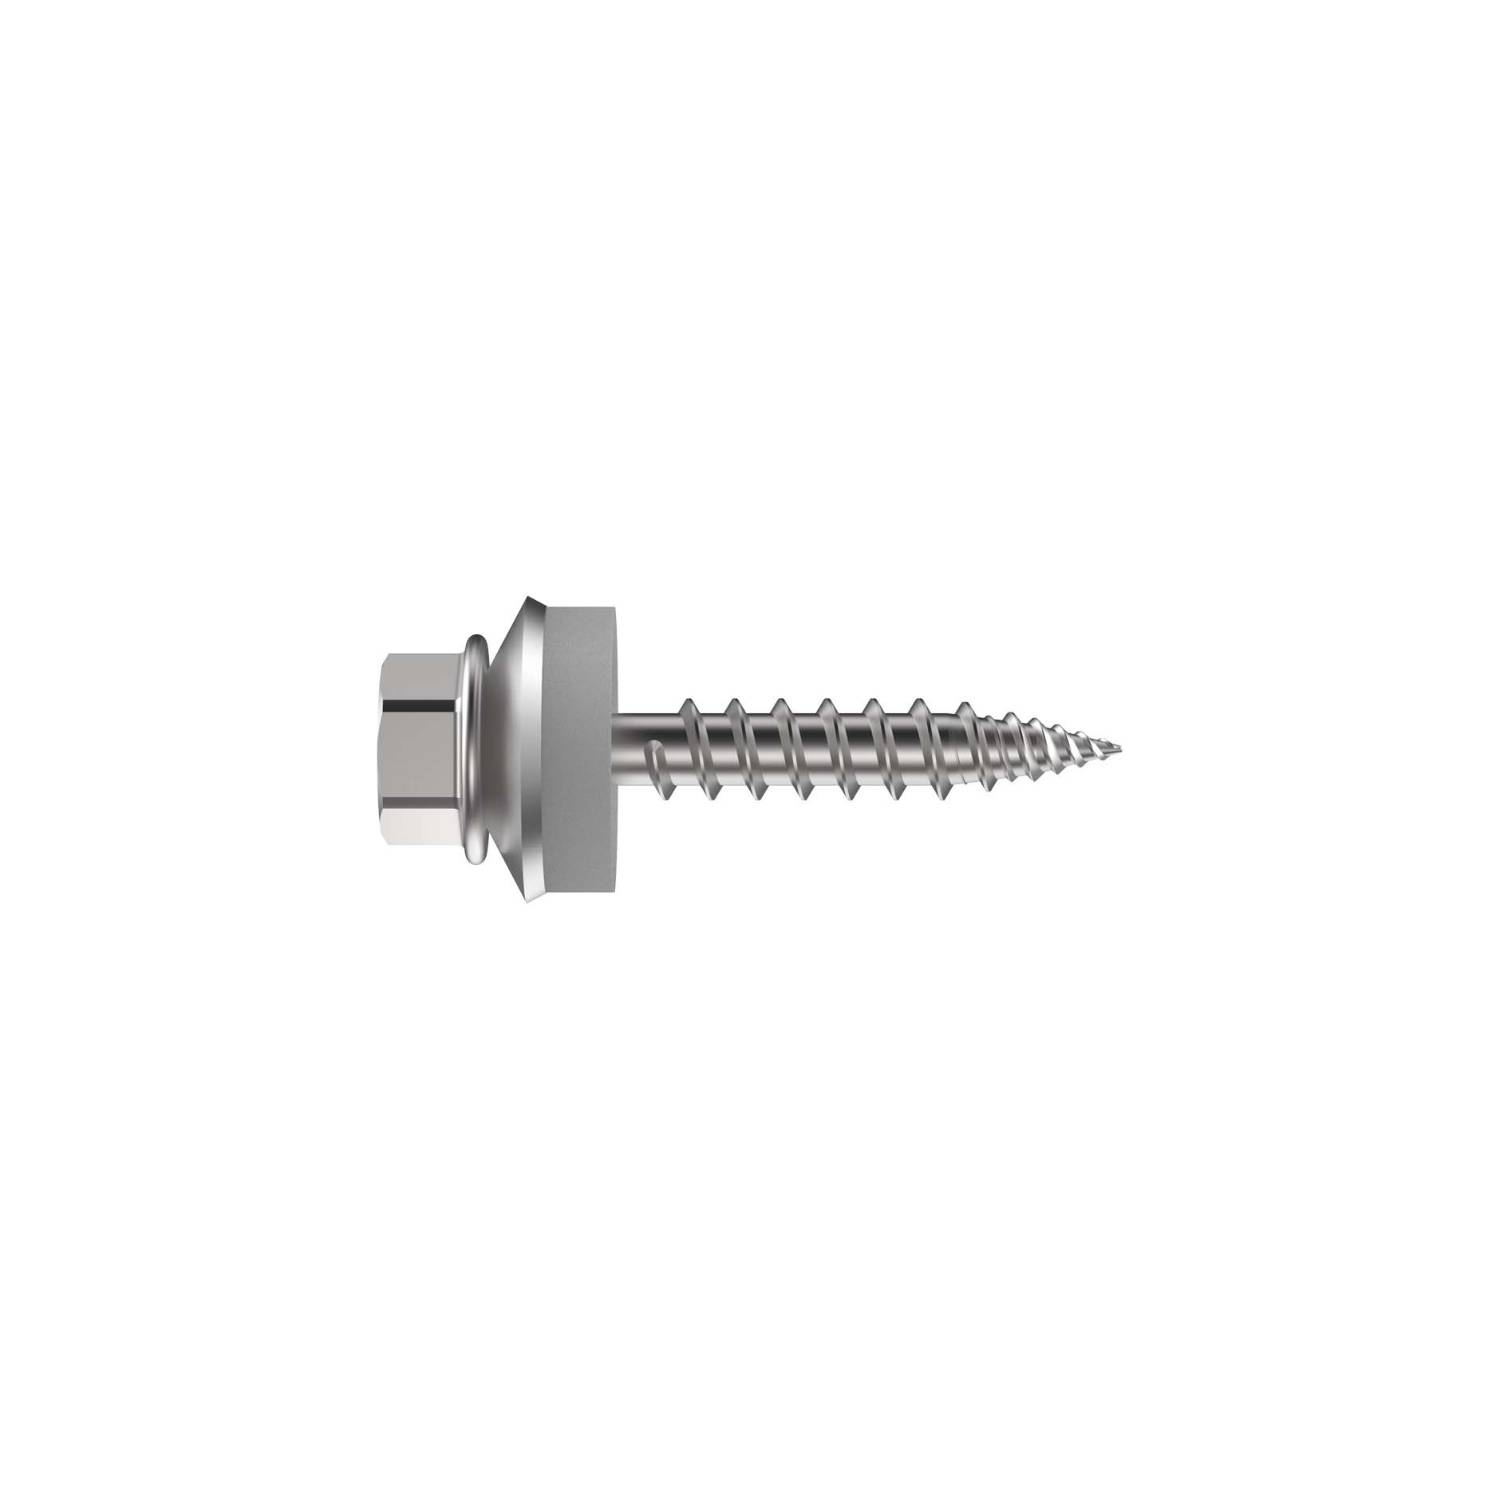 Clamping Fastener with Pierce Point - CXLW-4.8  - Austenitic Stainless Steel Fasteners